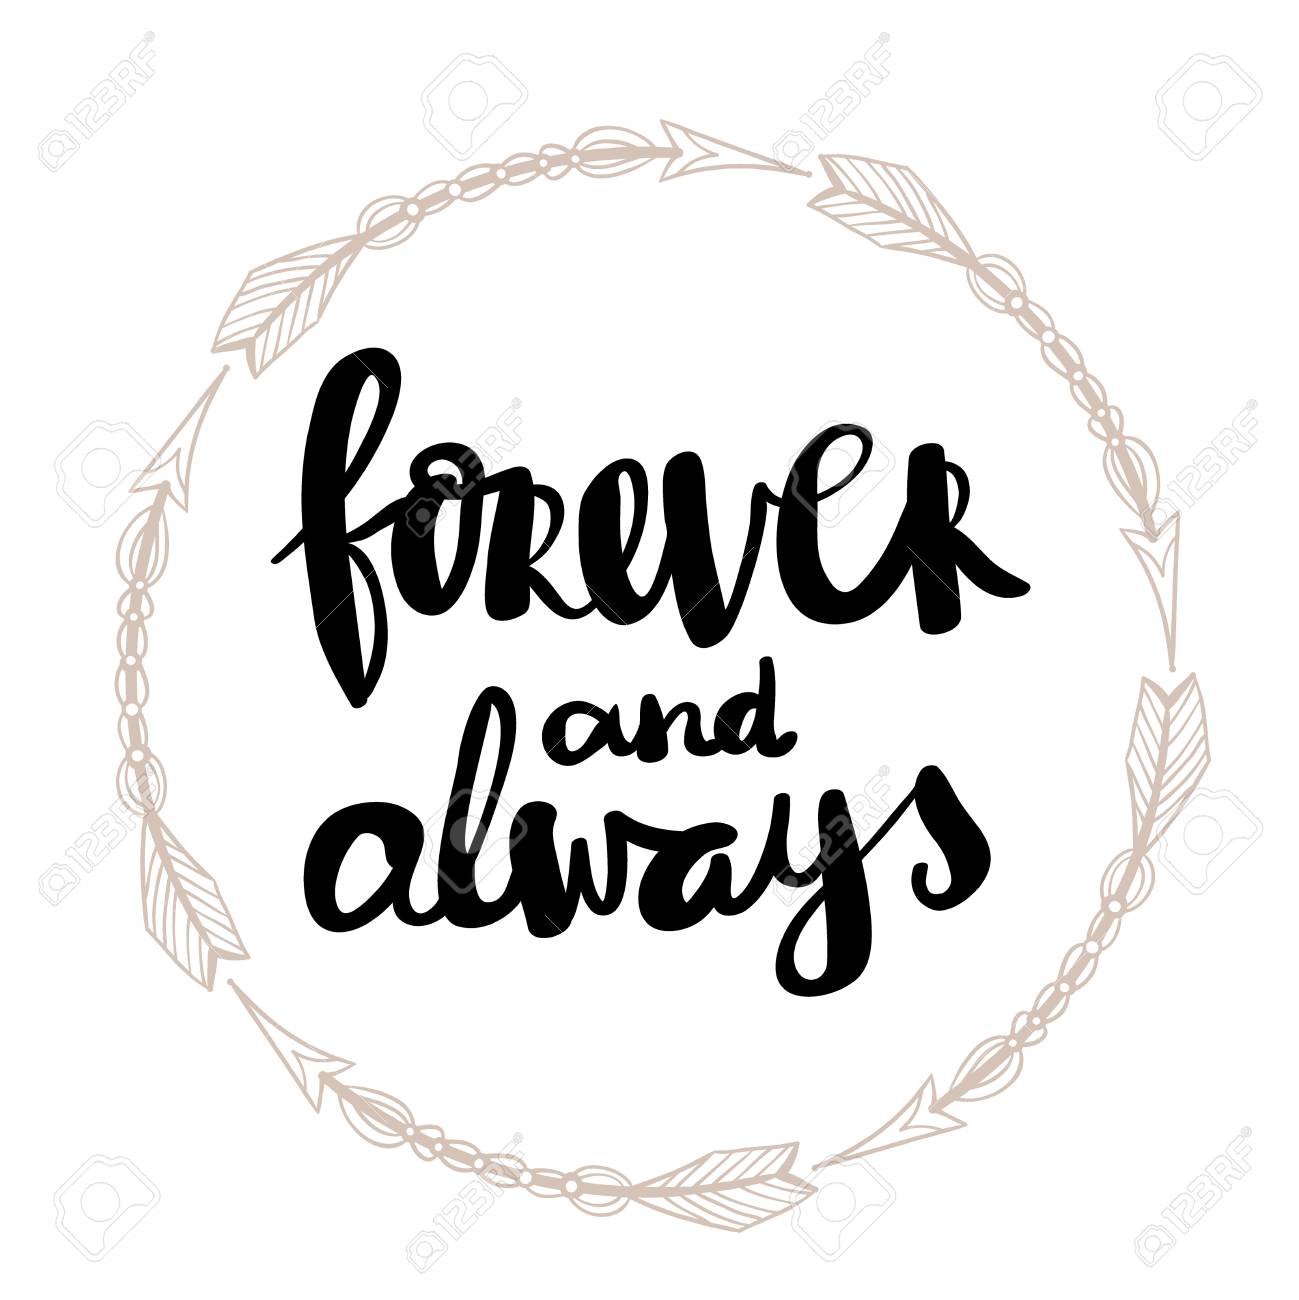 Forever And Always Calligraphy Handwritten On A Background Hand